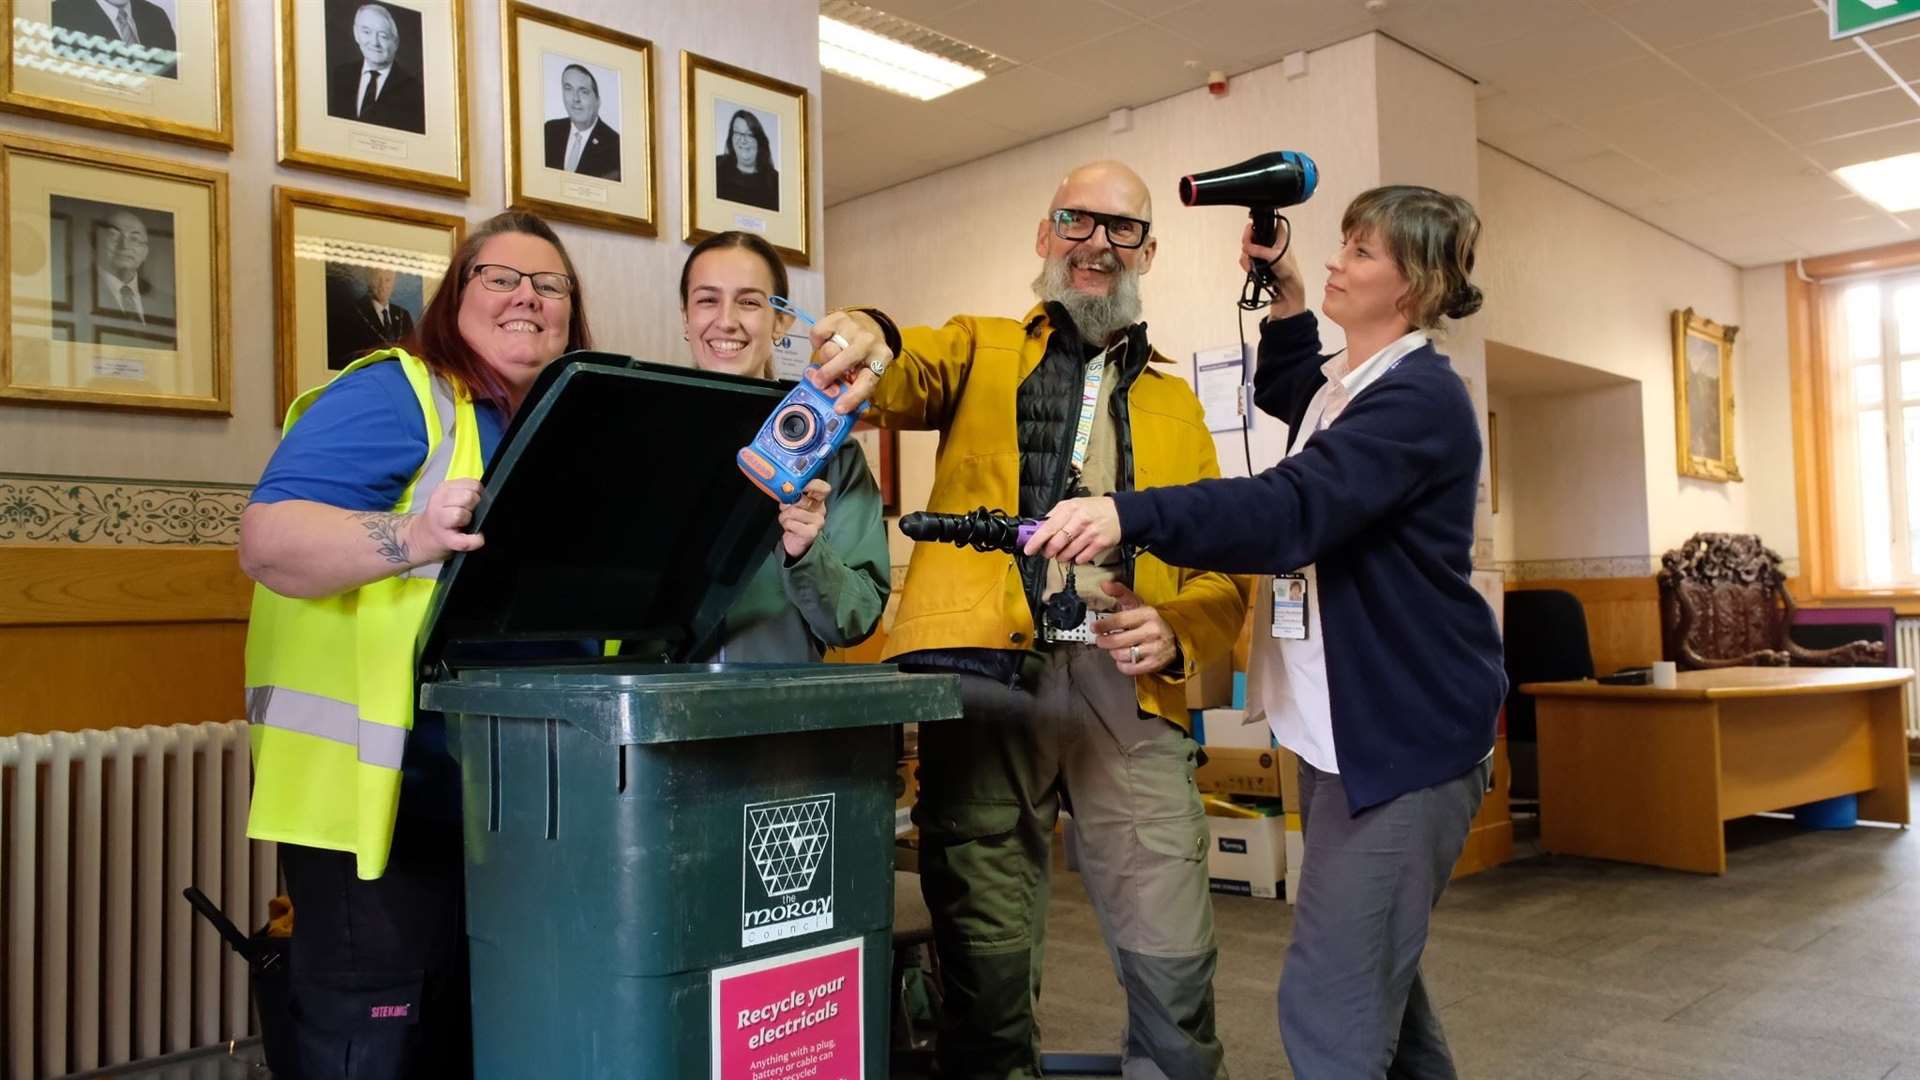 A new electrical recycling scheme has been launched by Moray Council. Councillor Draeyk van der Horn (second right) welcomed it.